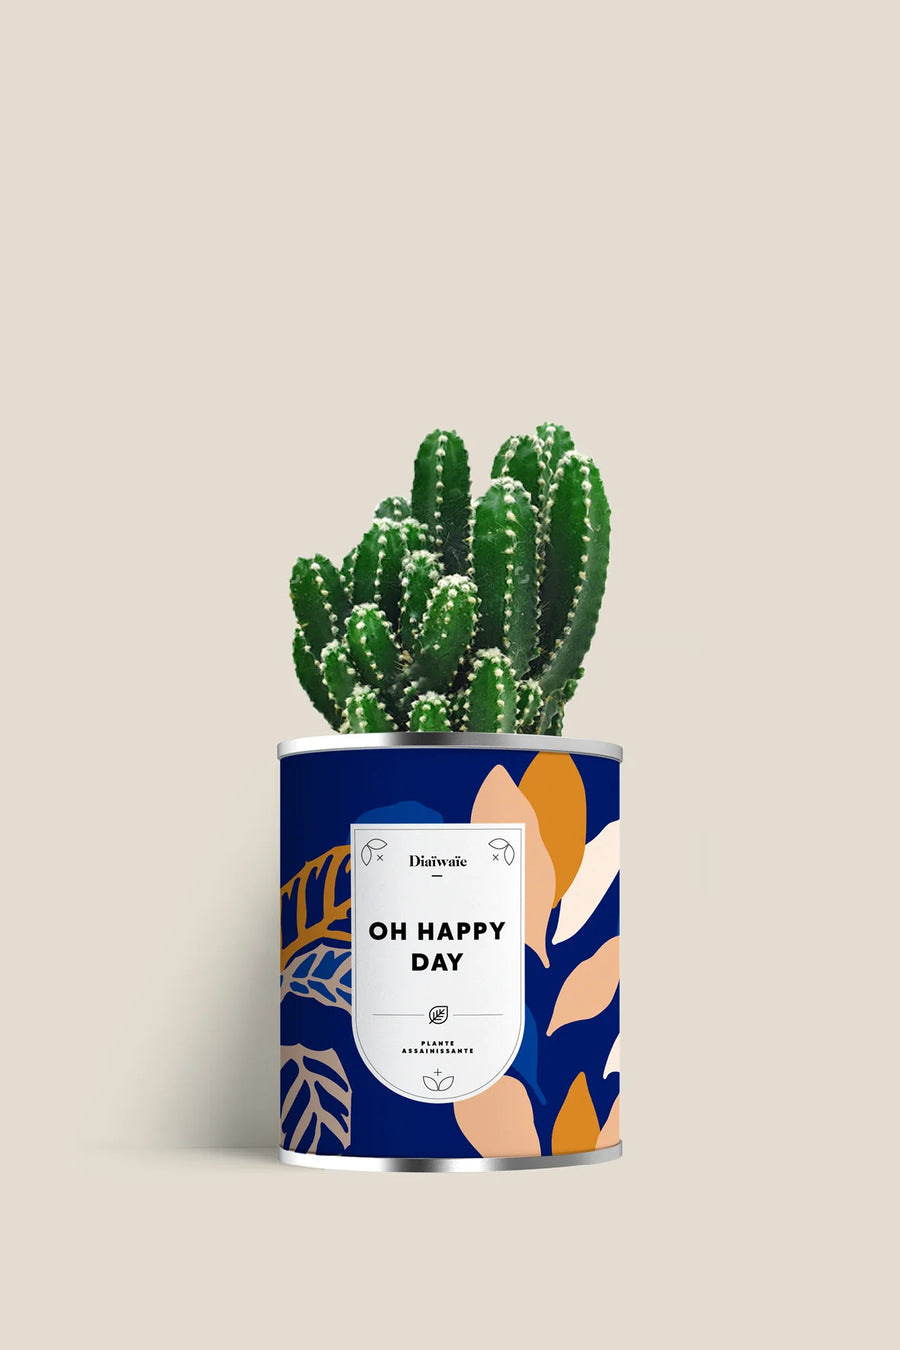 Diaiwaie - Plante Oh Happy day